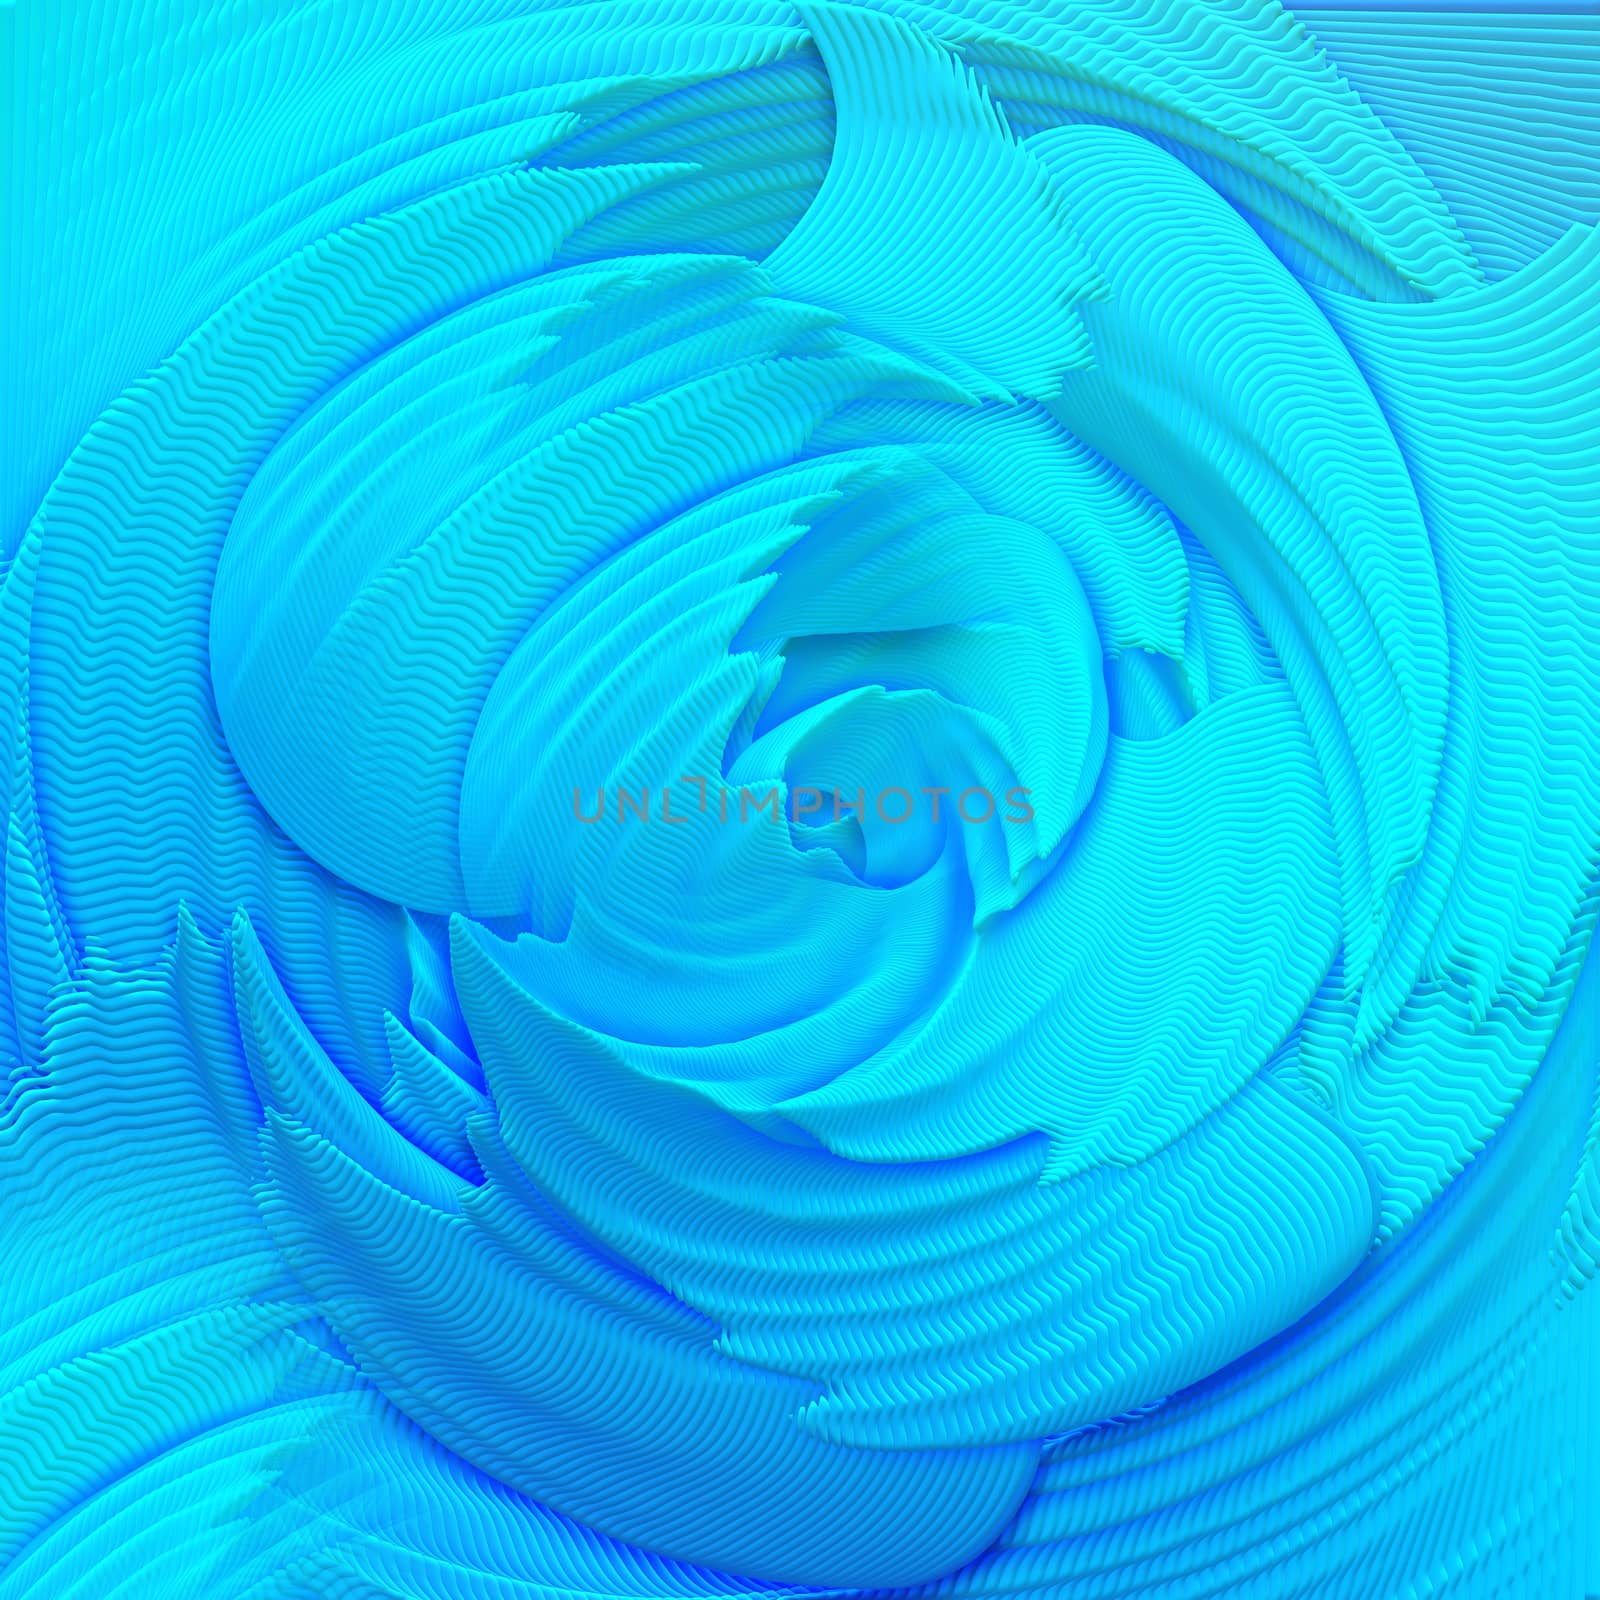 Swirling abstract textured background in blue tones .Texture or background